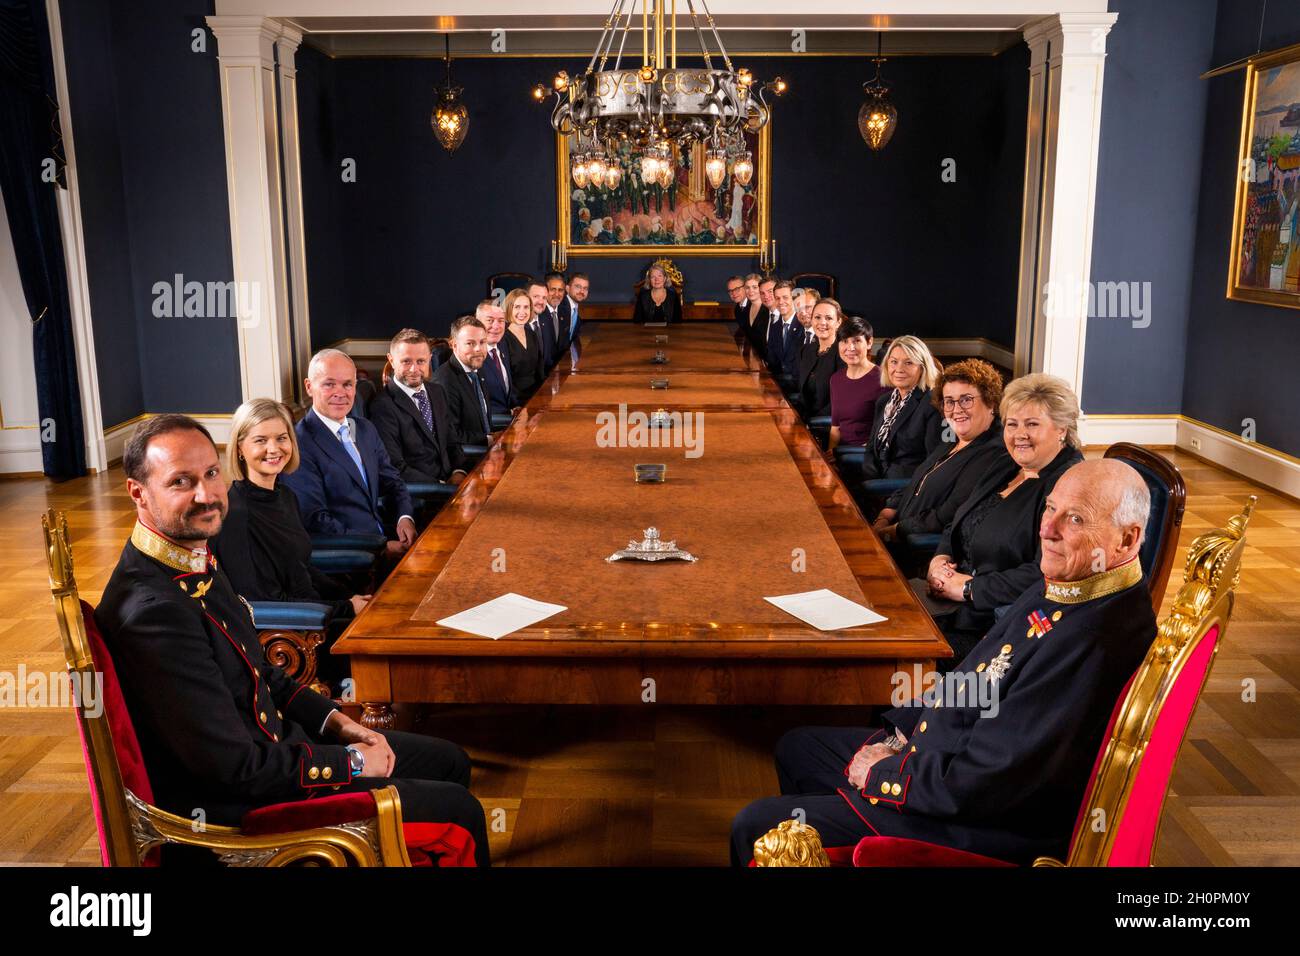 Oslo 20211014.The Solberg government meets the king for its last minister at the Palace on Thursday. Under the Prime Minister, the outgoing government appoints the ministers to the incoming government. F.v. and around the table: Crown Prince Haakon, Minister of Education and Integration Guri Melby (V), Minister of Finance Jan Tore Sanner (H), Minister of Health Bent Hoie (H), Minister of Labor and Social Affairs Torbjørn Roe Isaksen (H), Minister of Defense Frank Bakke-Jensen (H ), Minister of Trade and Industry Iselin Nybo (V), Minister of Development Dag Inge Ulstein (KrF), Minister of Cultu Stock Photo